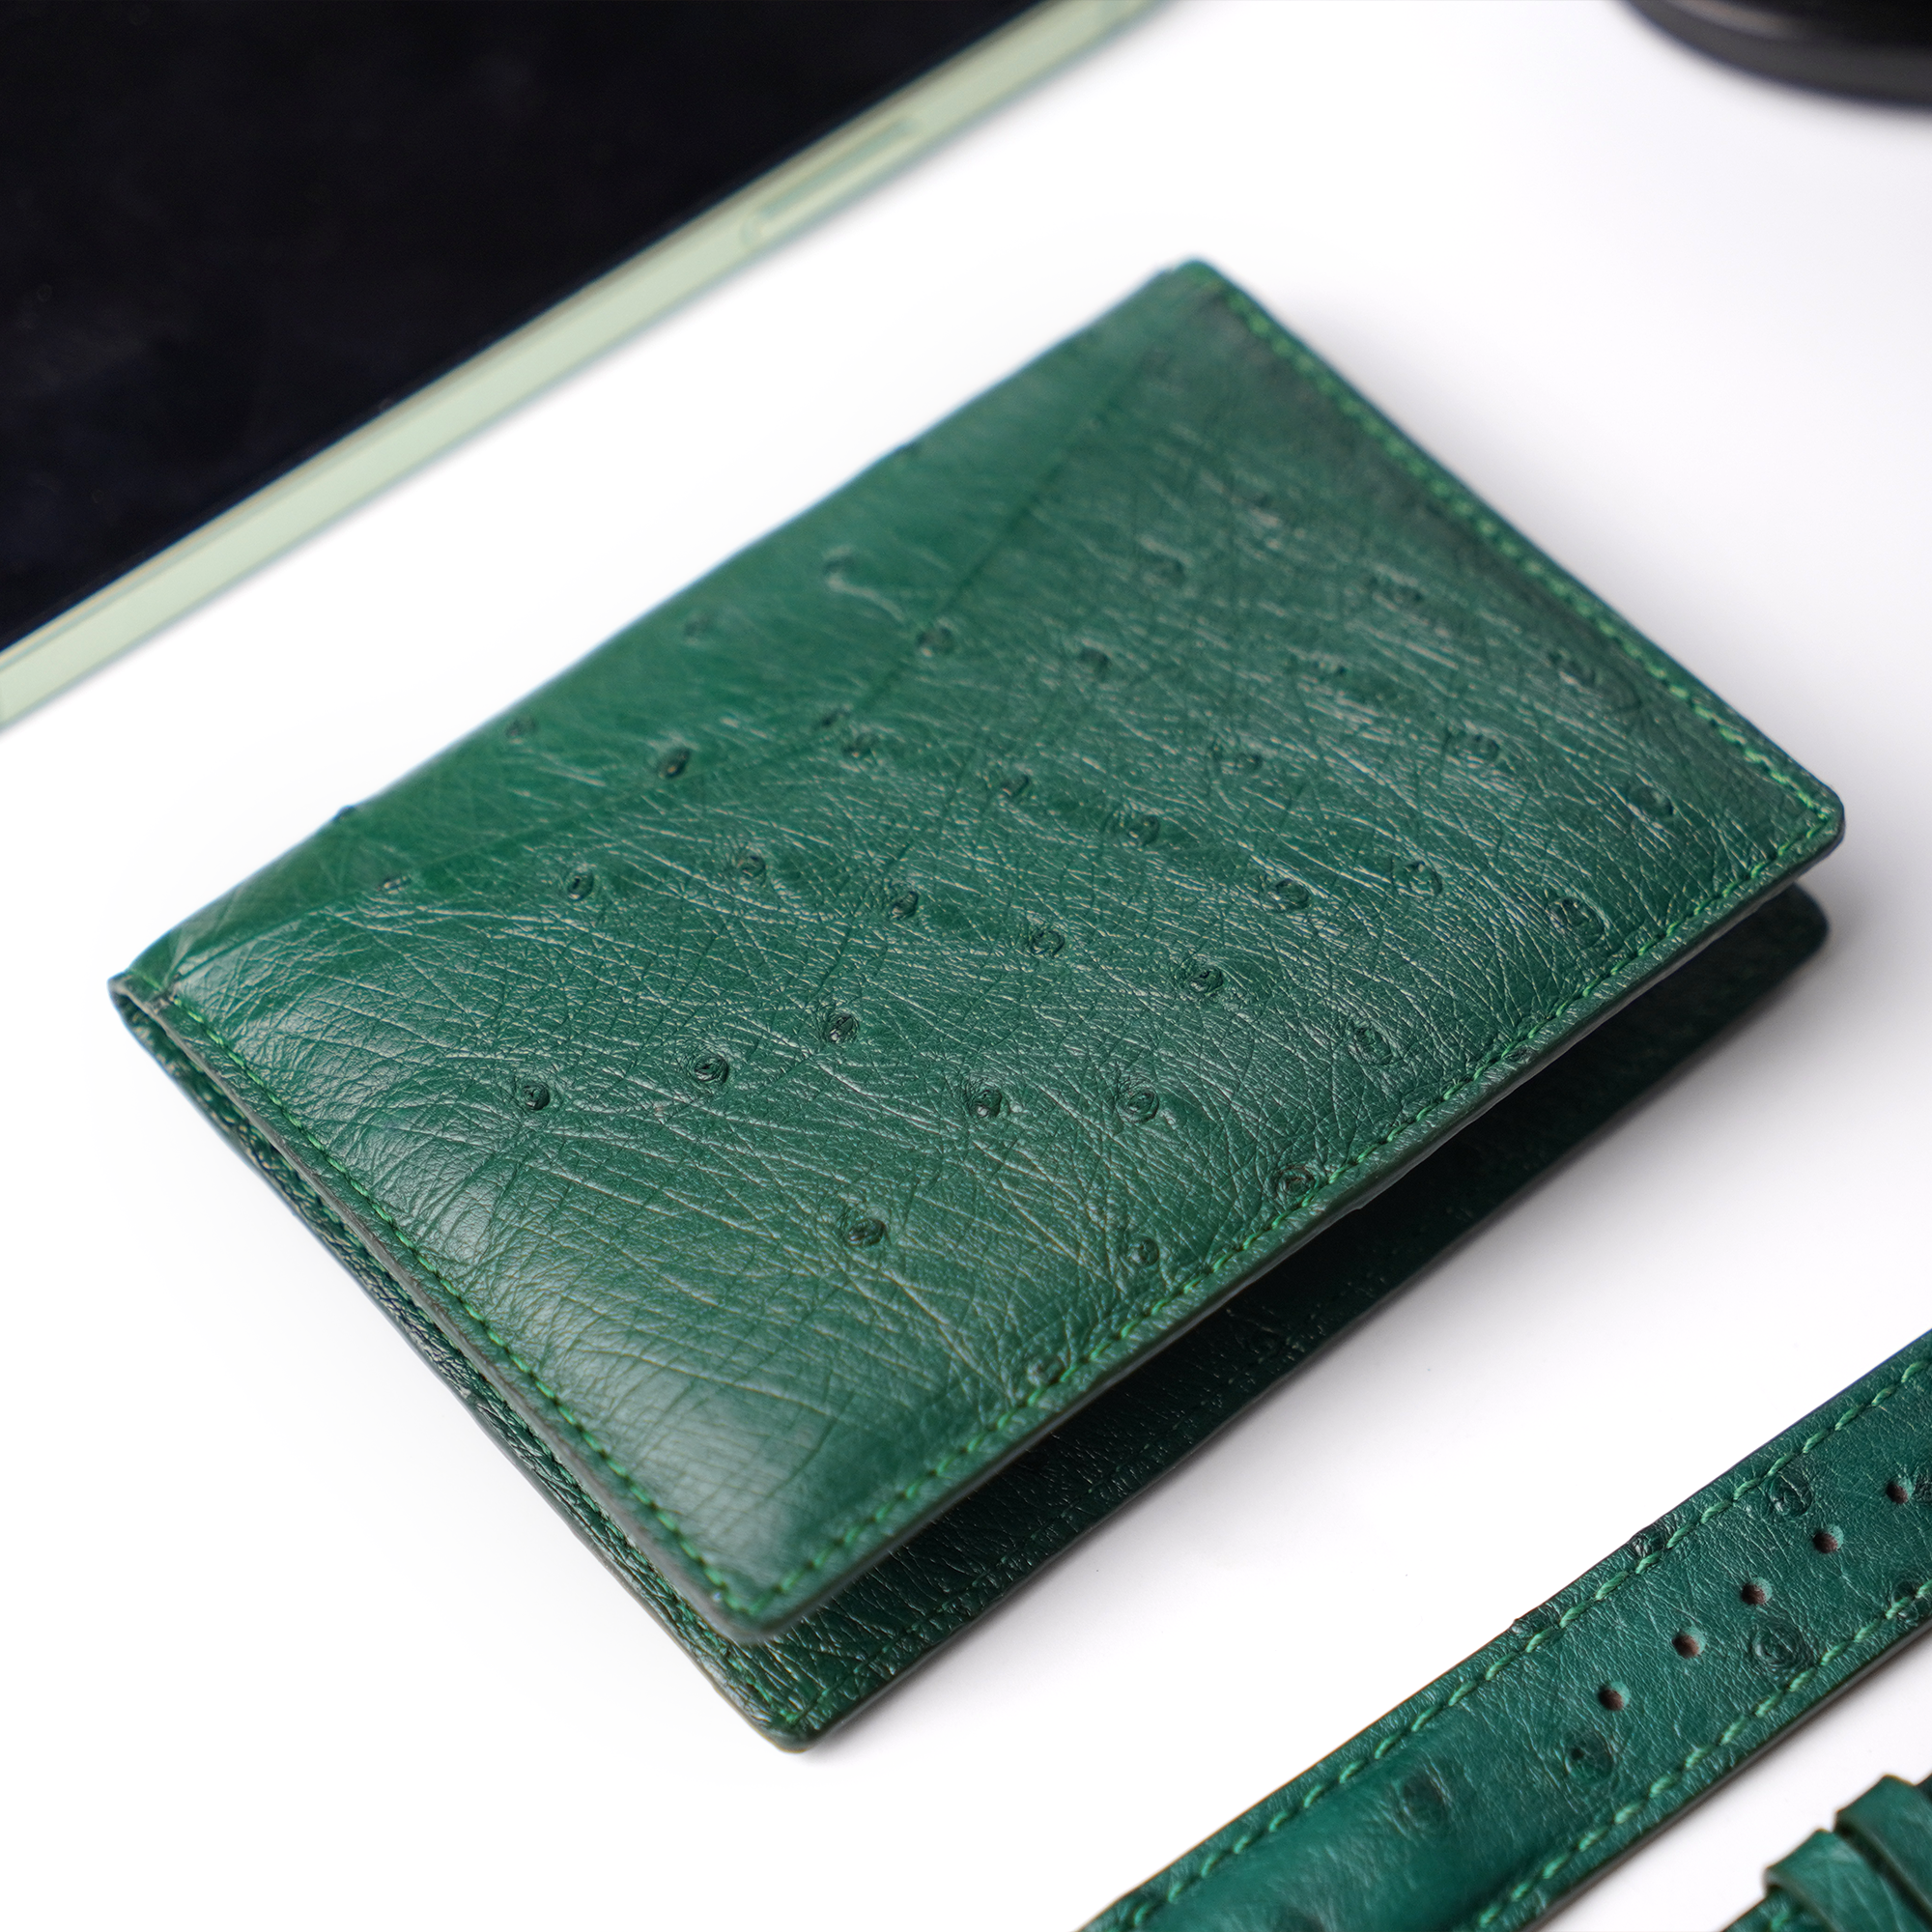 Green Double Side Ostrich Leather Credit Card Holder | RFID Blocking | CARDOS-08